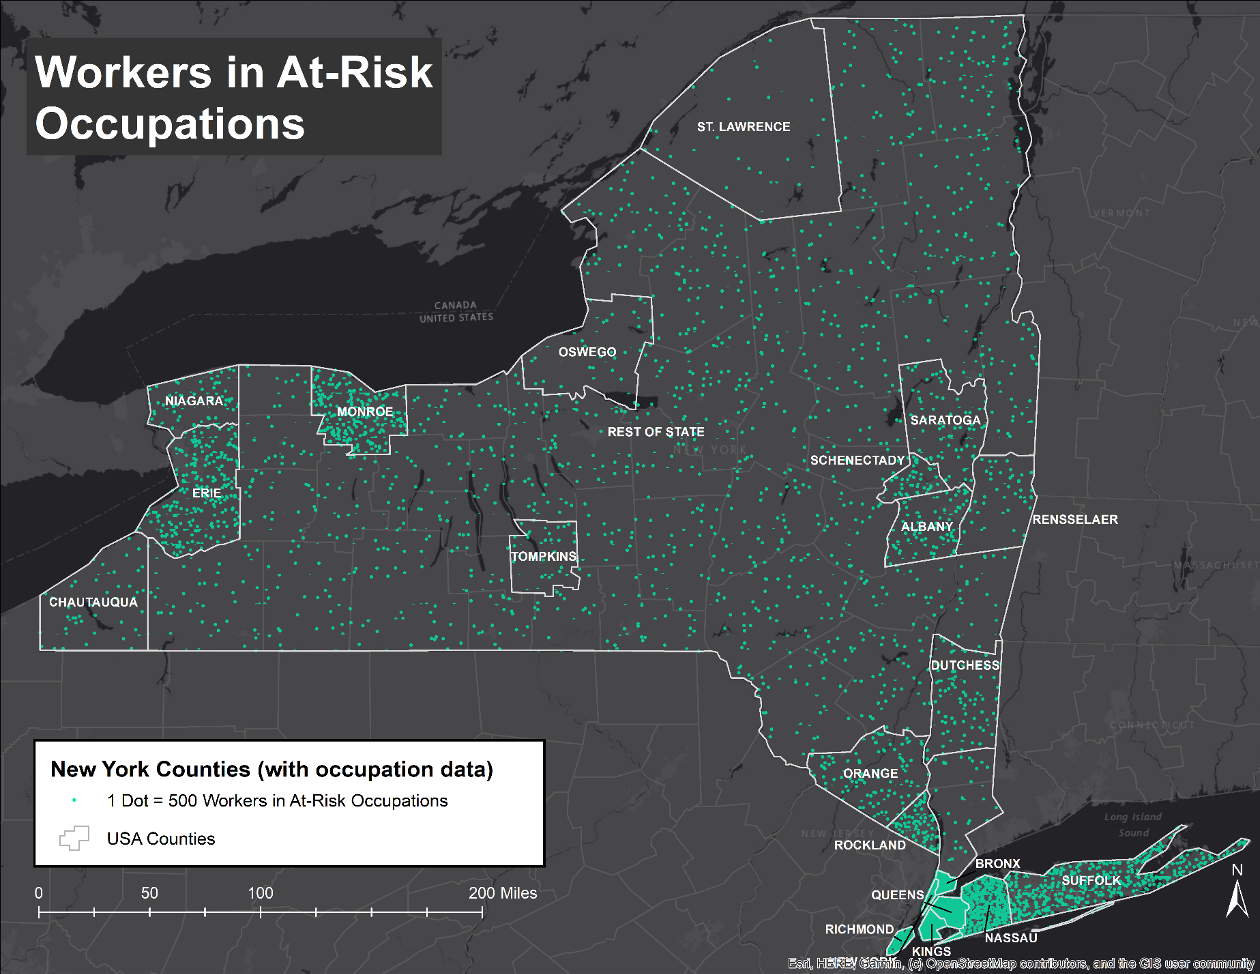 By far, ther are more workers in at risk occupations in the greater Manhattan area than in upstate locations